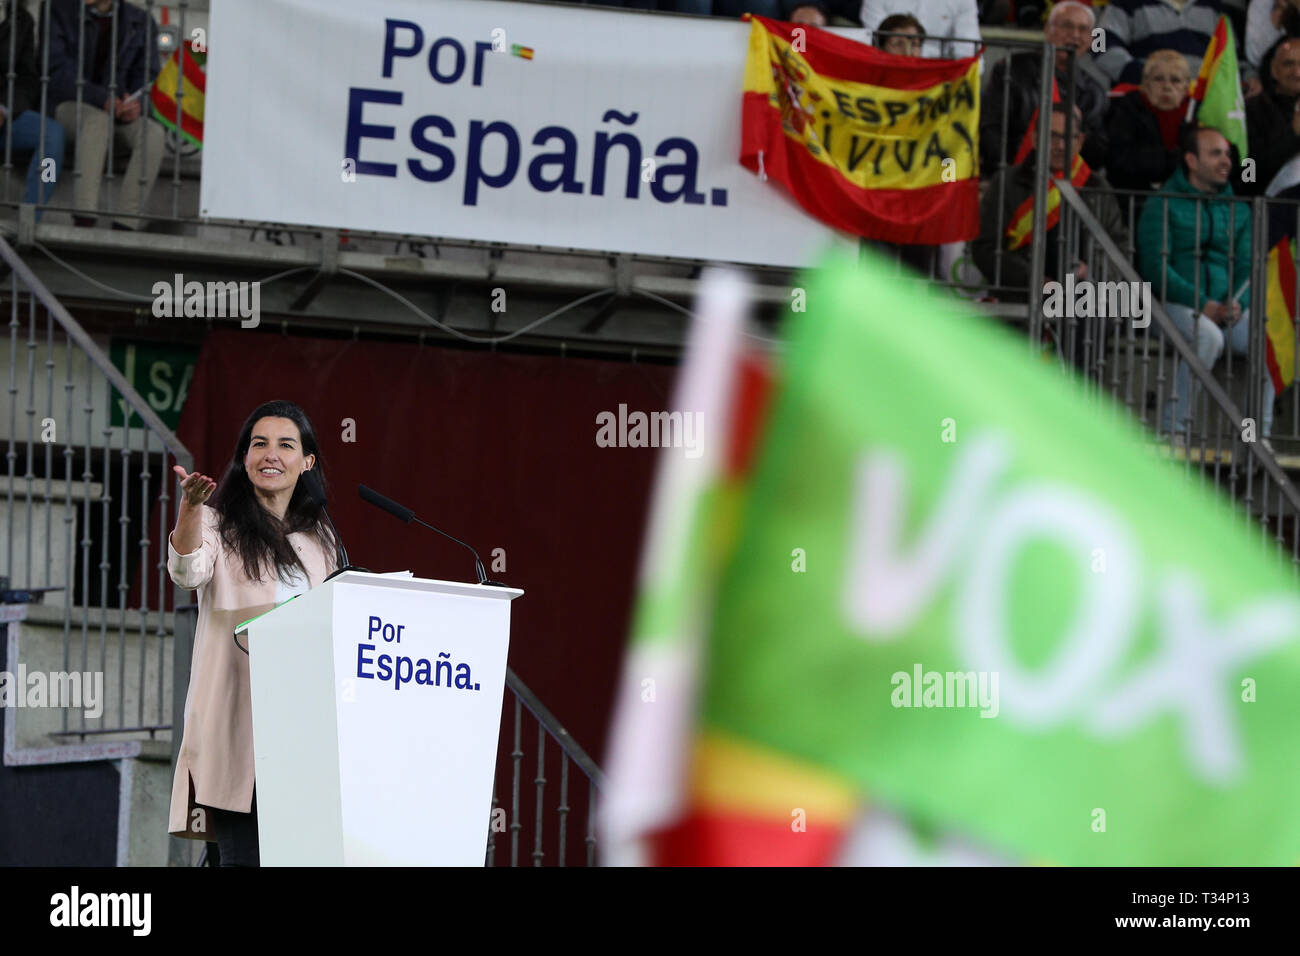 Rocio Monasterio seen speaking during the event. Vox presented its candidates the 'change' for the general elections on April 28, at a large public event in Leganés, which was attended by its leader, Santiago Abascal, the president of Vox Madrid, Rocío Monasterio, and the founder of the José Antonio Ortega Lara formation. Stock Photo